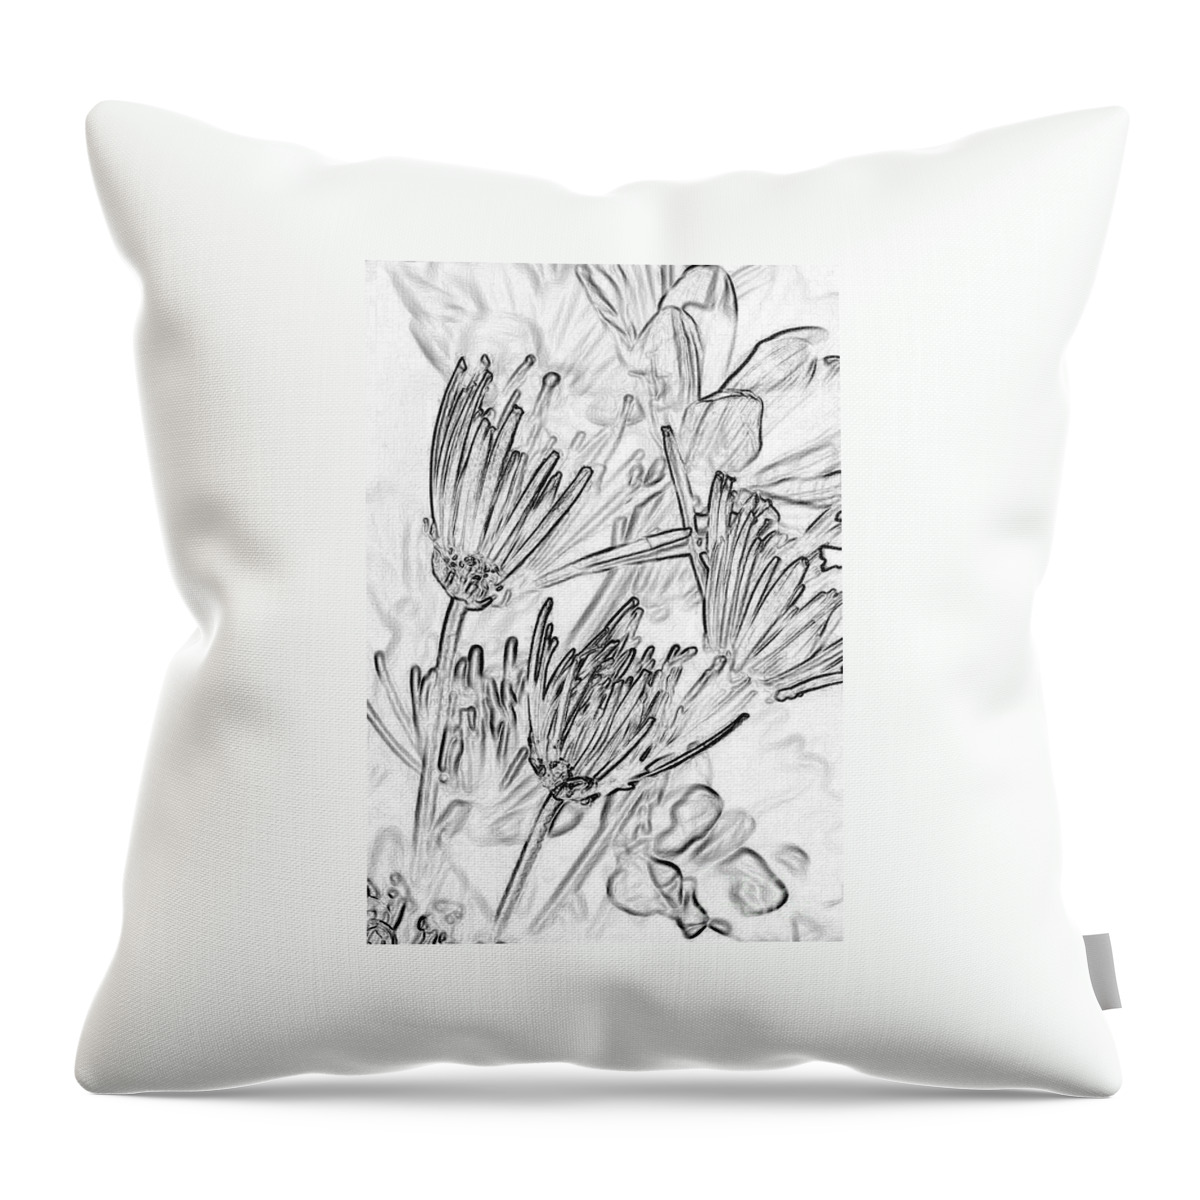 Flowers Throw Pillow featuring the photograph A Flower Sketch by Julie Lueders 